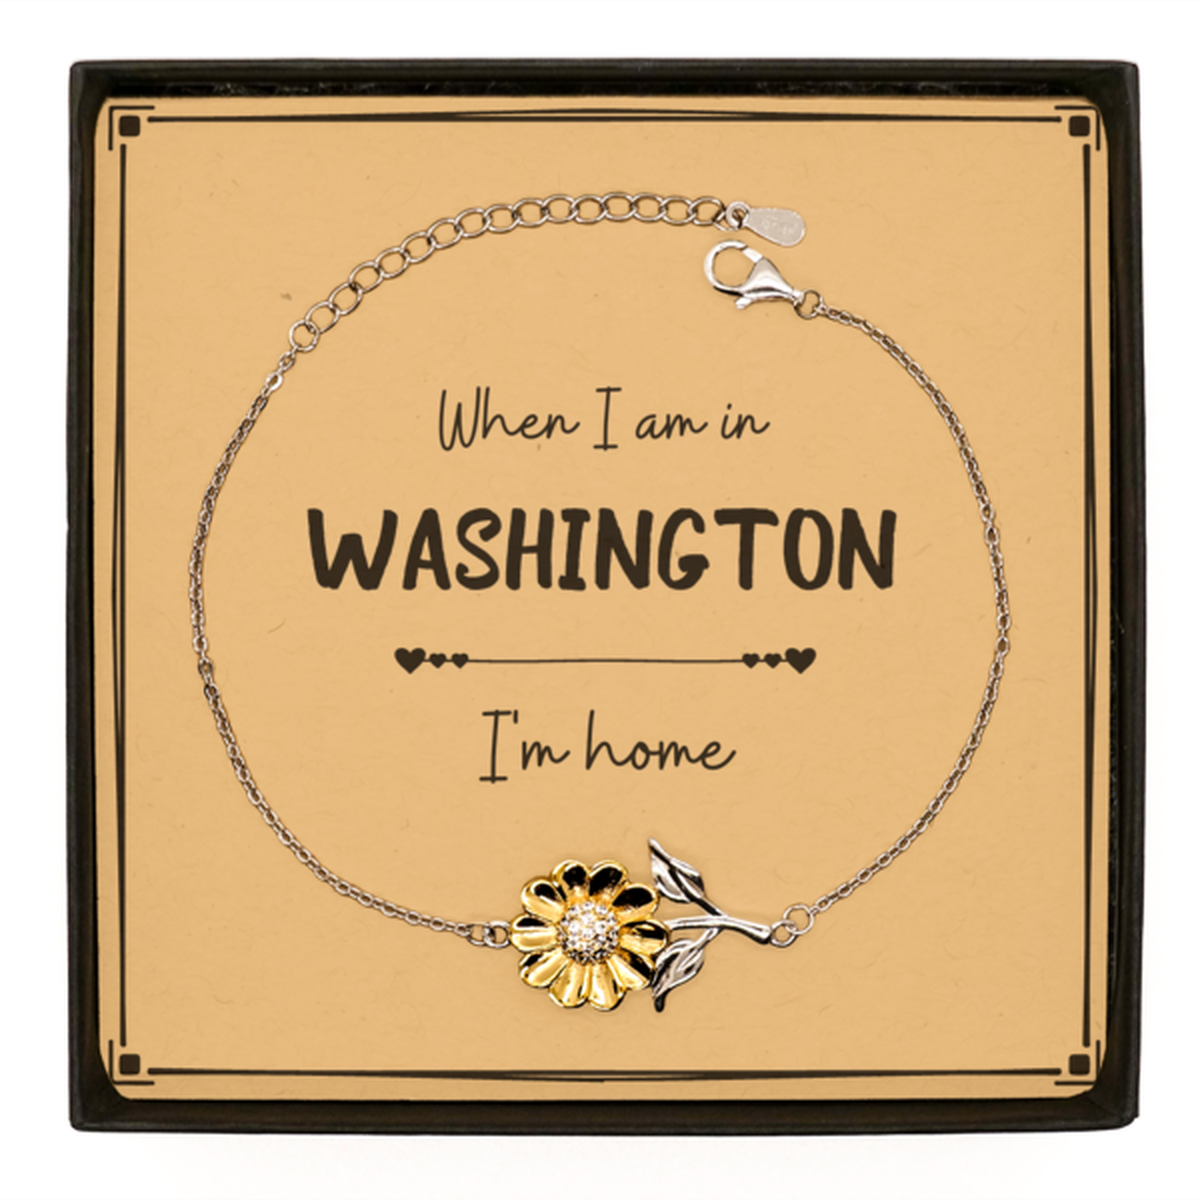 When I am in Washington I'm home Sunflower Bracelet, Message Card Gifts For Washington, State Washington Birthday Gifts for Friends Coworker